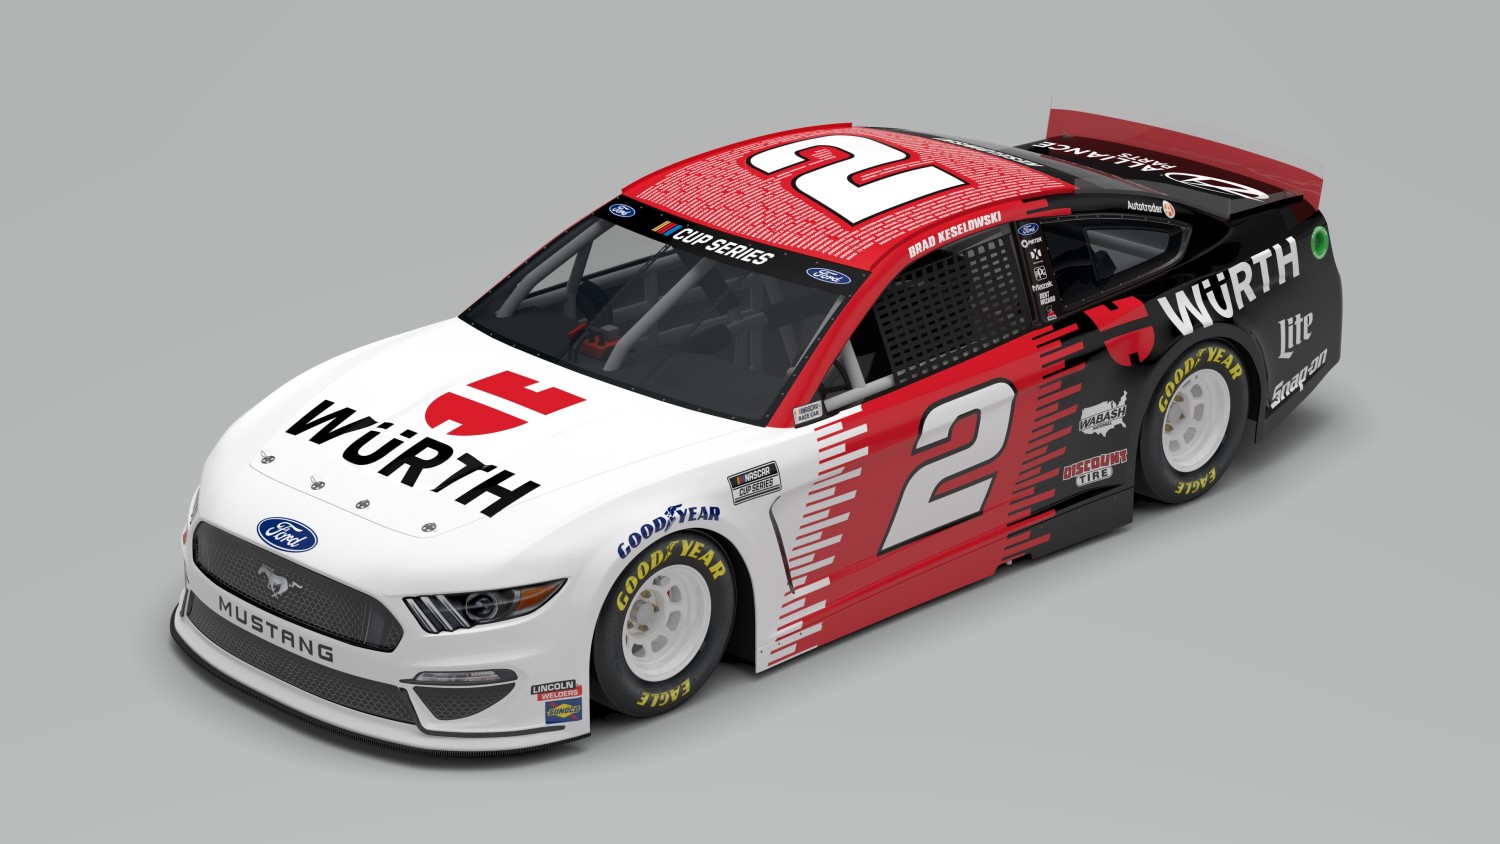 Team Penske's No. 2 Wurth USA/UTI Class of 2020 Ford Mustang, driven by 2012 Champion Brad Keselowski, will feature a one-of-a-kind paint scheme with the names of Universal Technical Institute recent graduates in the July 19 race at TMS